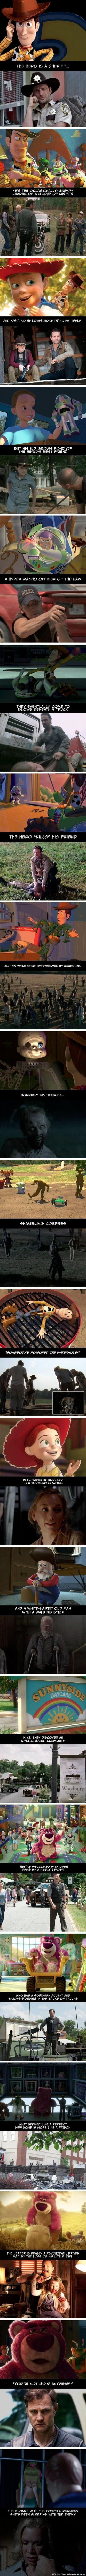 Silly Likes – The Walking Dead and Toy Story